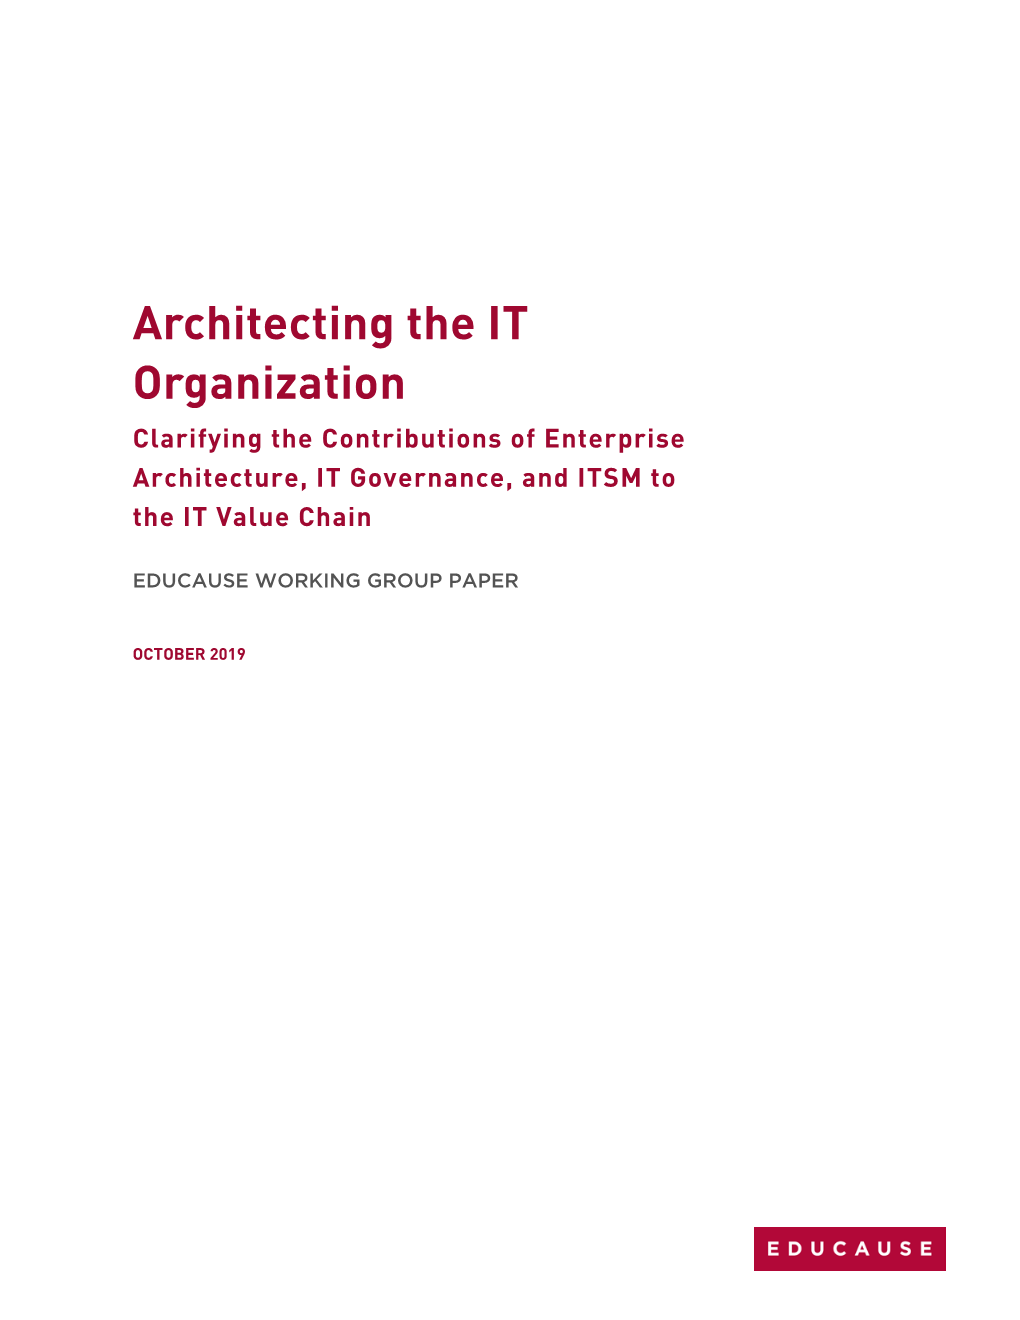 Architecting the IT Organization: Clarifying the Contributions of Enterprise Architecture, IT Governance, and ITSM to the IT Value Chain